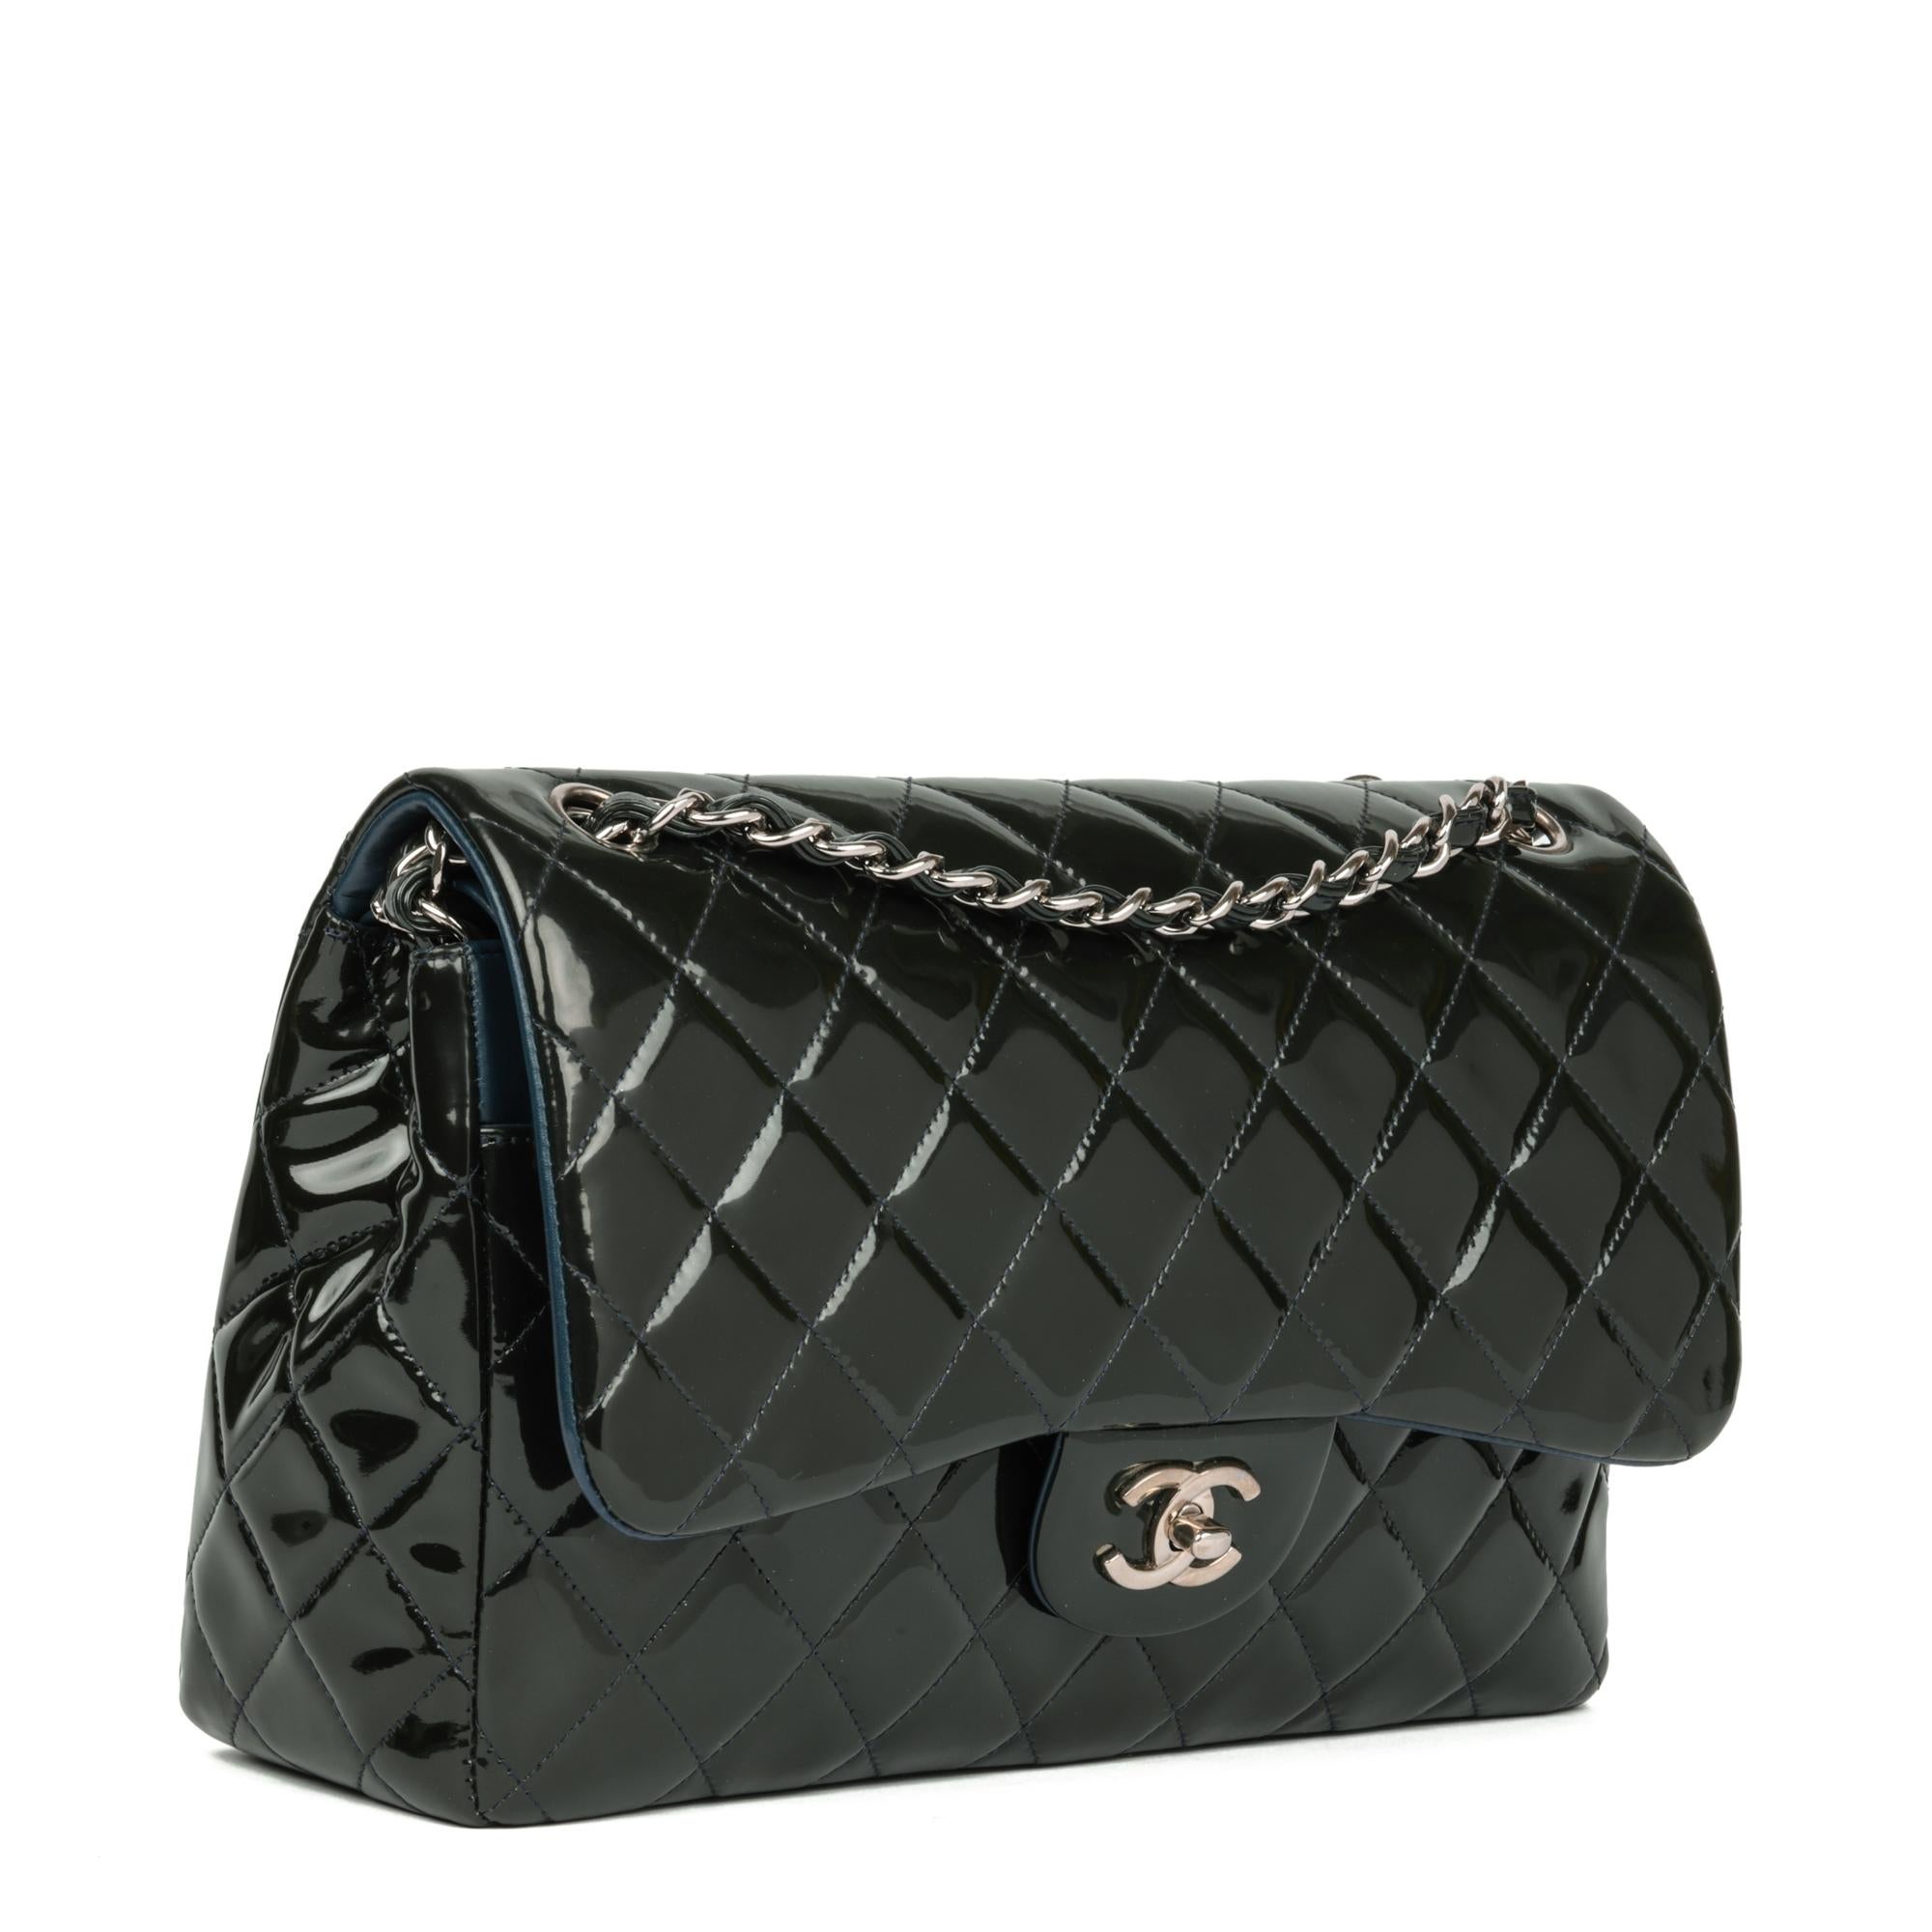 CHANEL
Forest Green Quilted Patent Leather Verso Classic Double Flap Bag

Serial Number: 18327433
Age (Circa): 2013
Accompanied By: Chanel Dust Bag, Box, Protective Felt, Authenticity Card
Authenticity Details: Authenticity Card, Serial Sticker